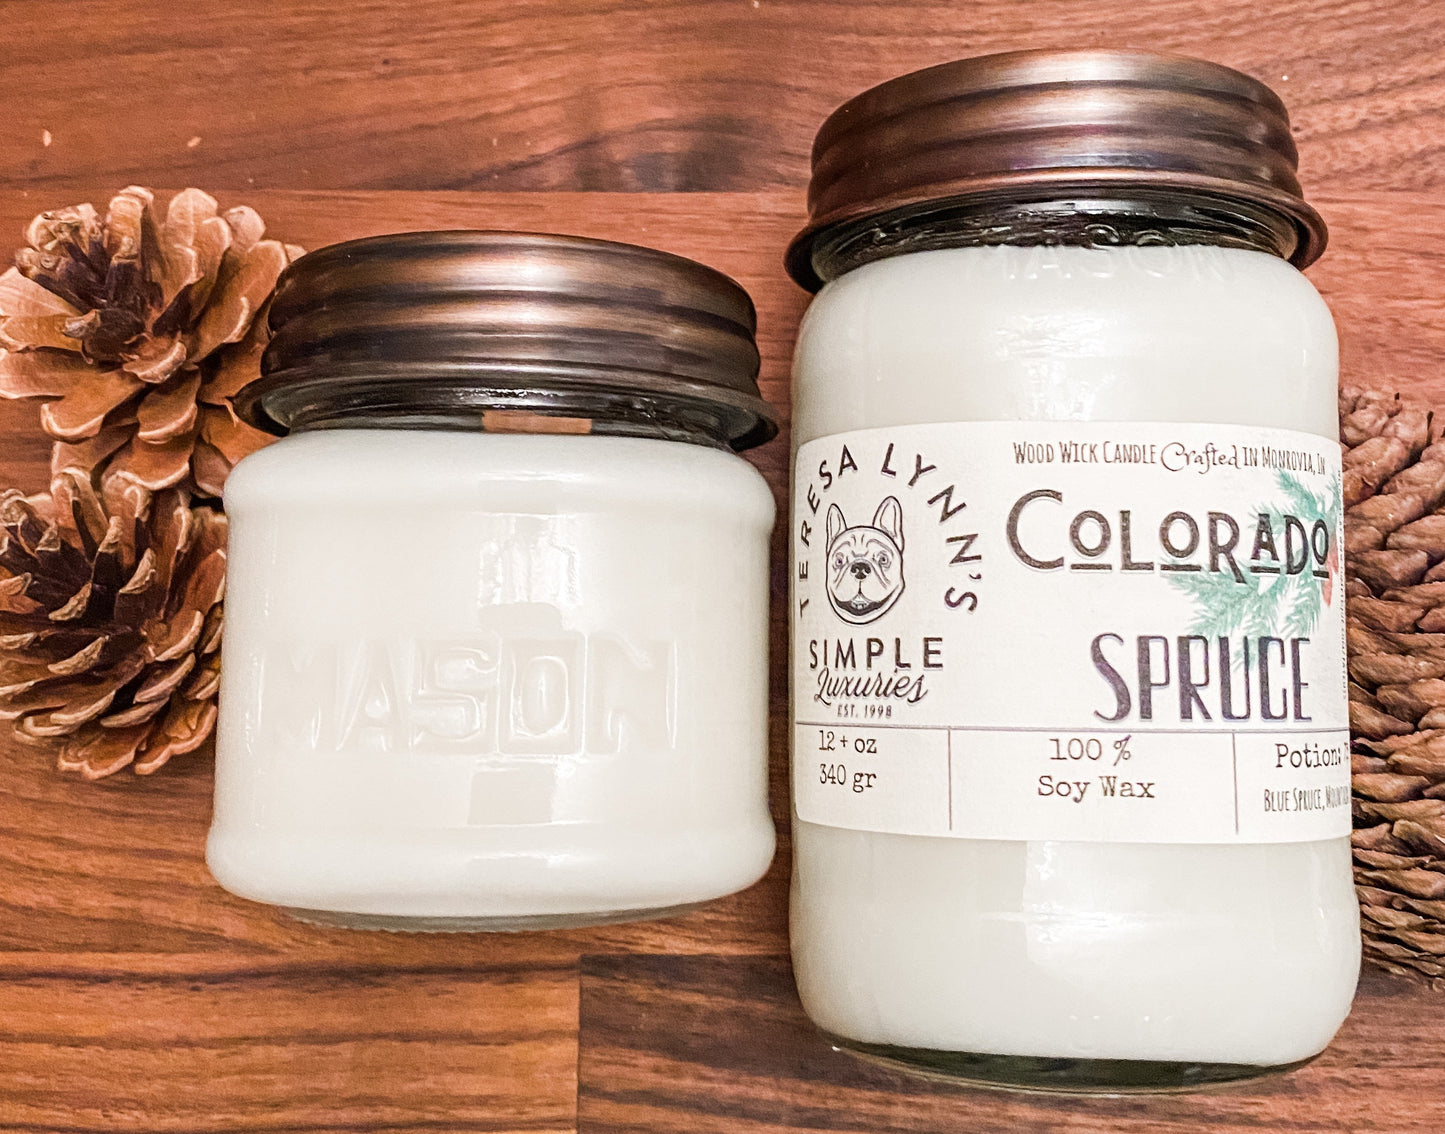 Colorado Spruce, Soy wax wooden wick candle